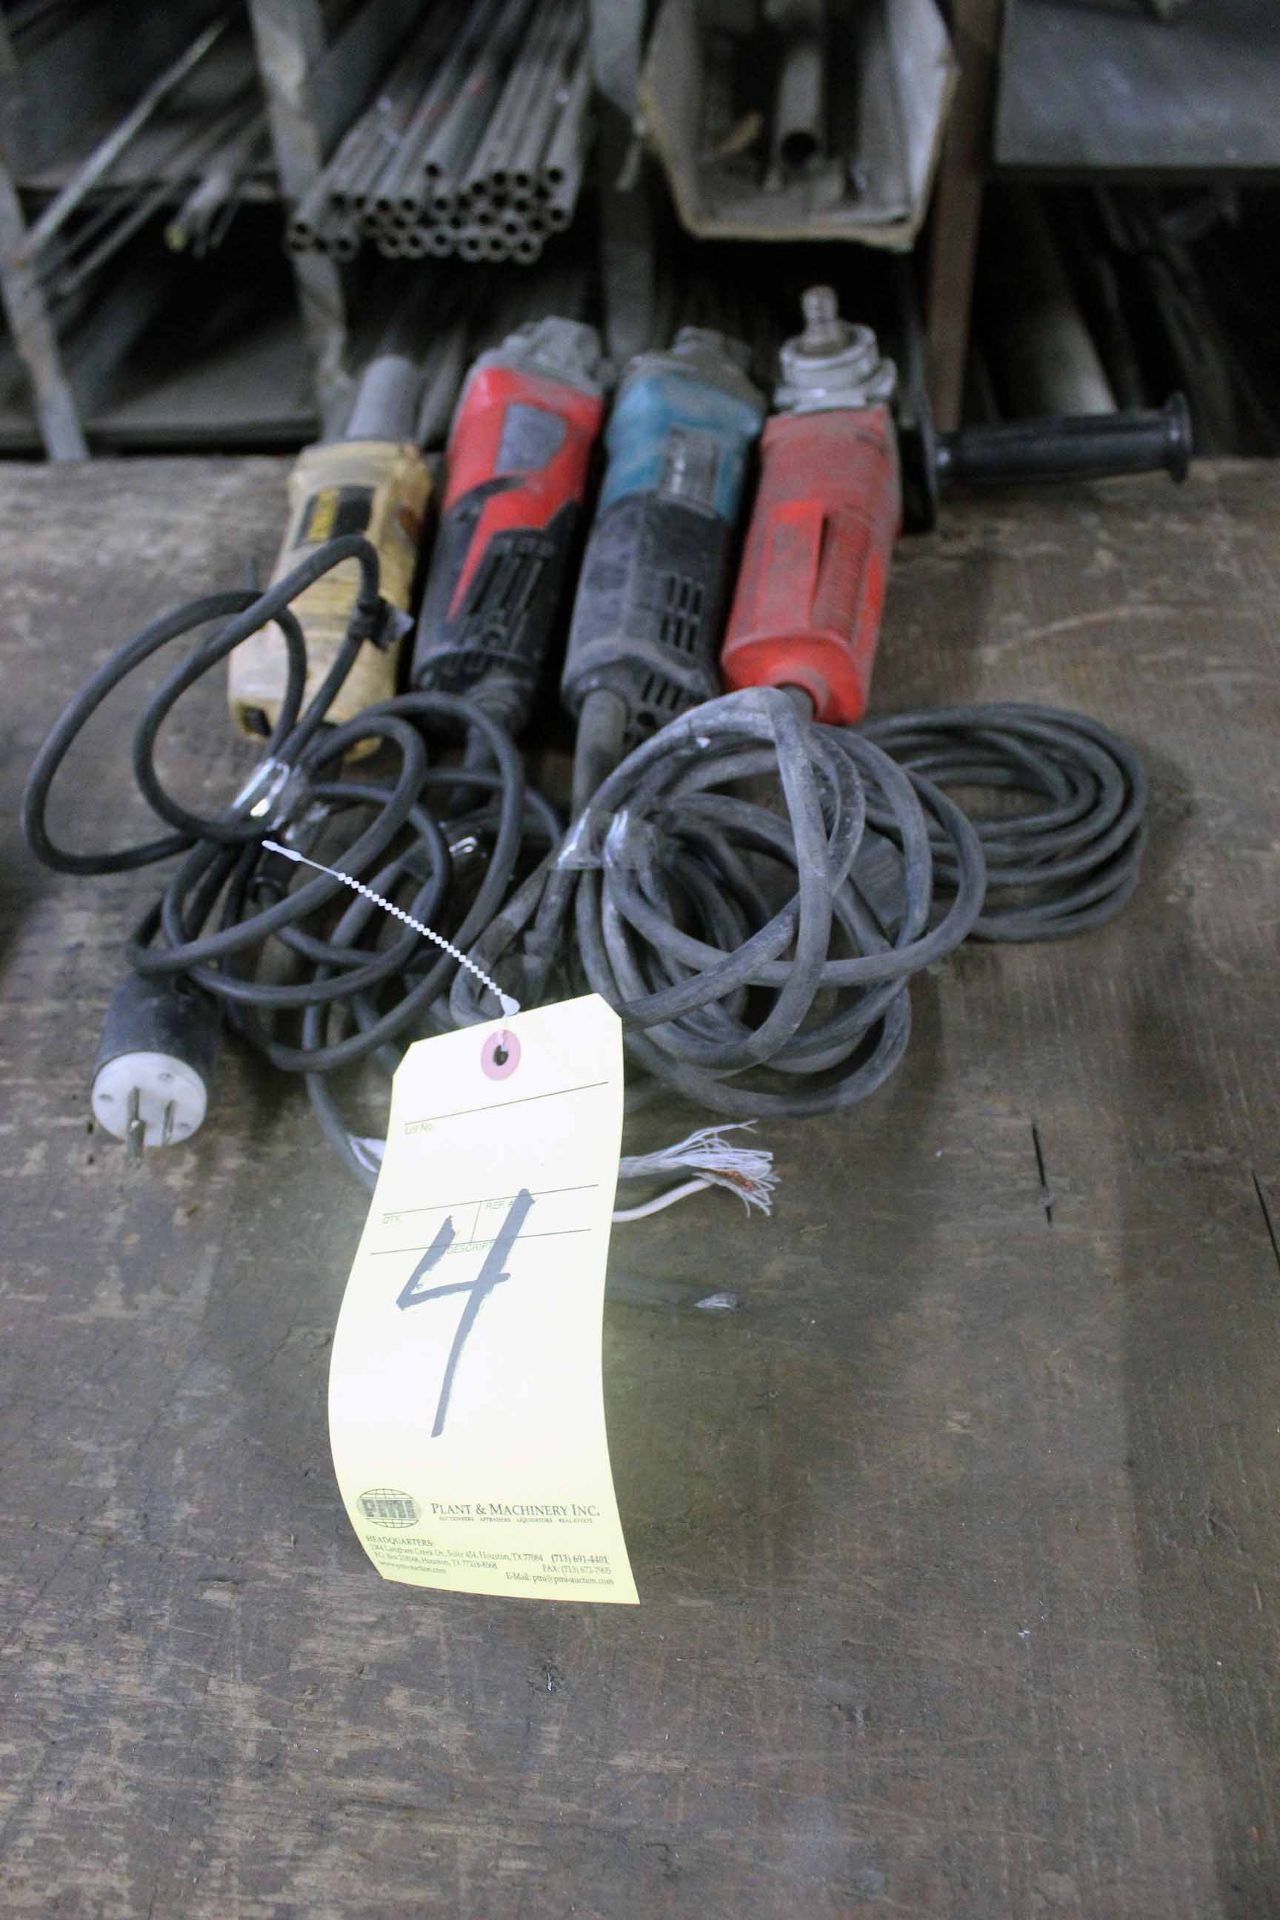 LOT OF ELECTRIC ANGLE GRINDERS, 4"